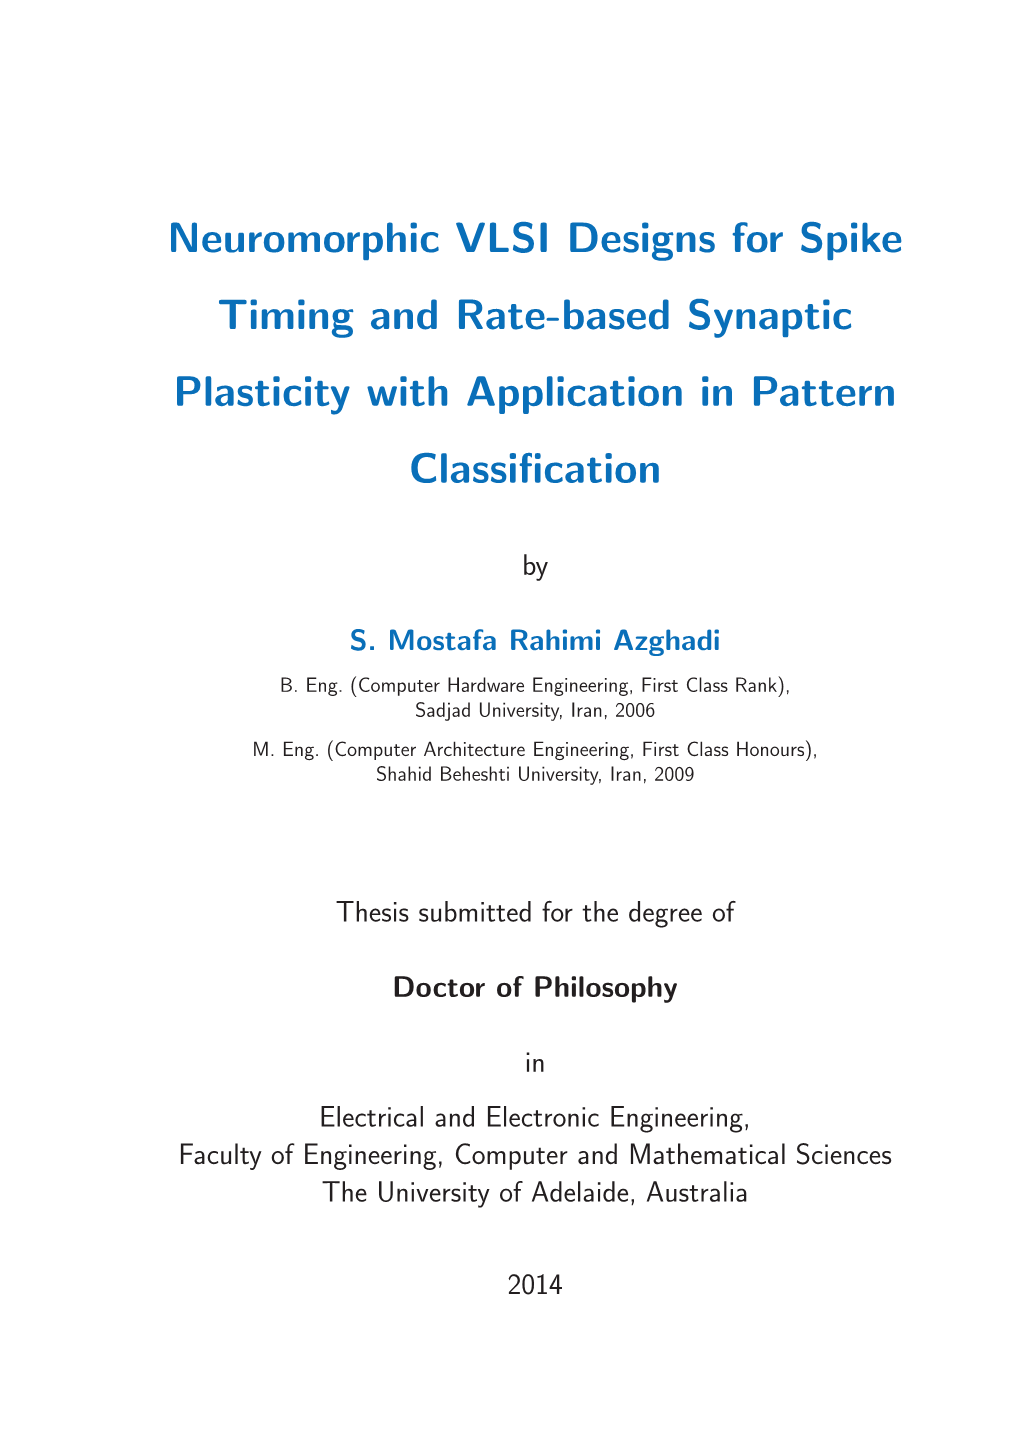 Neuromorphic VLSI Designs for Spike Timing and Rate-Based Synaptic Plasticity with Application in Pattern Classiﬁcation